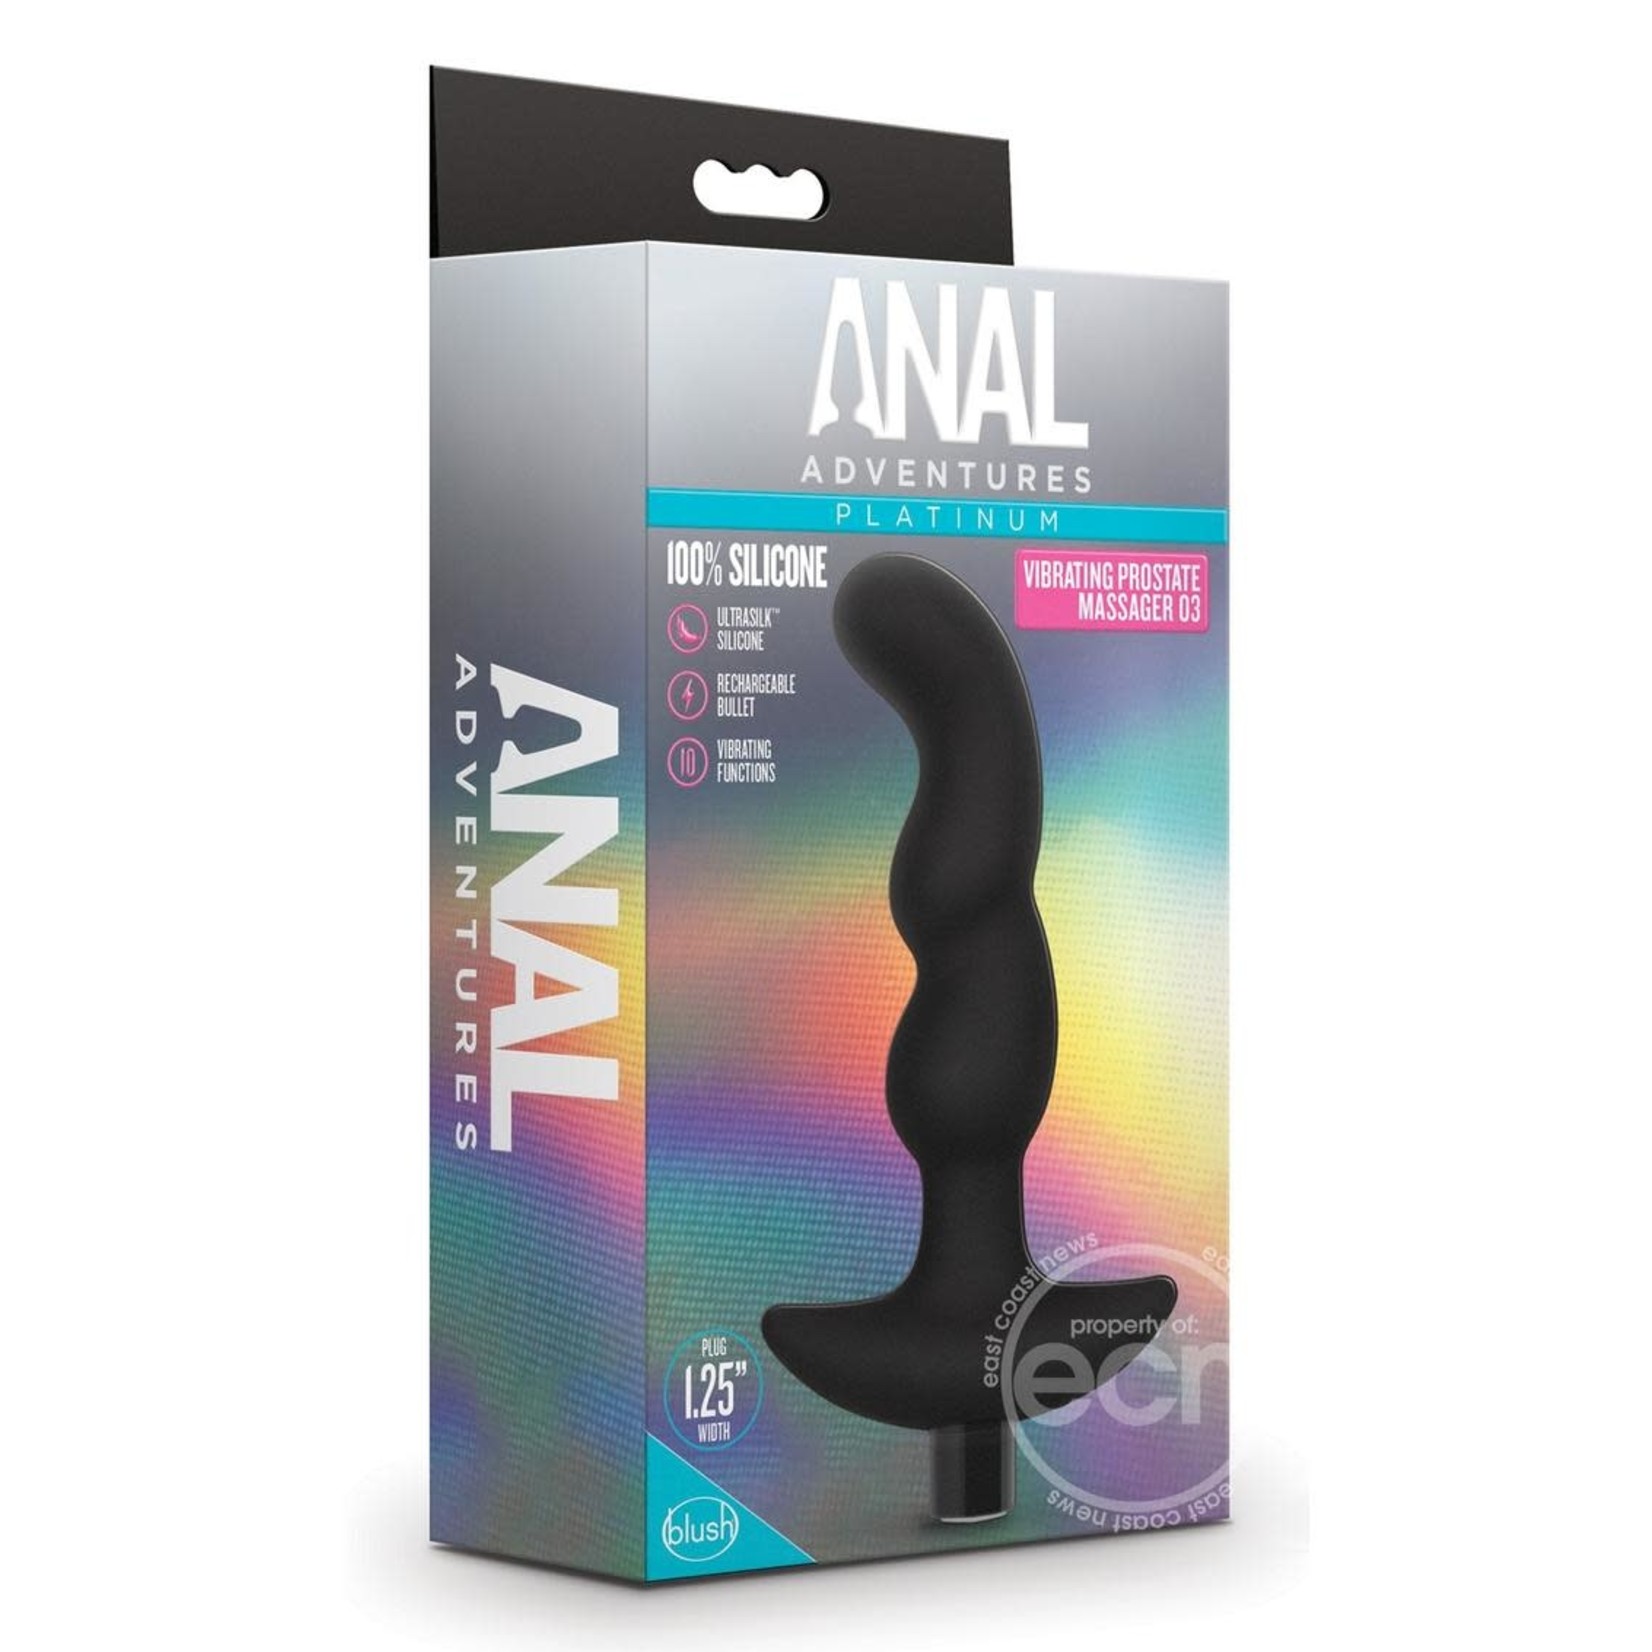 Anal Adventures Platinum Silicone Rechargeable Vibrating Prostate Massager 03 - Black